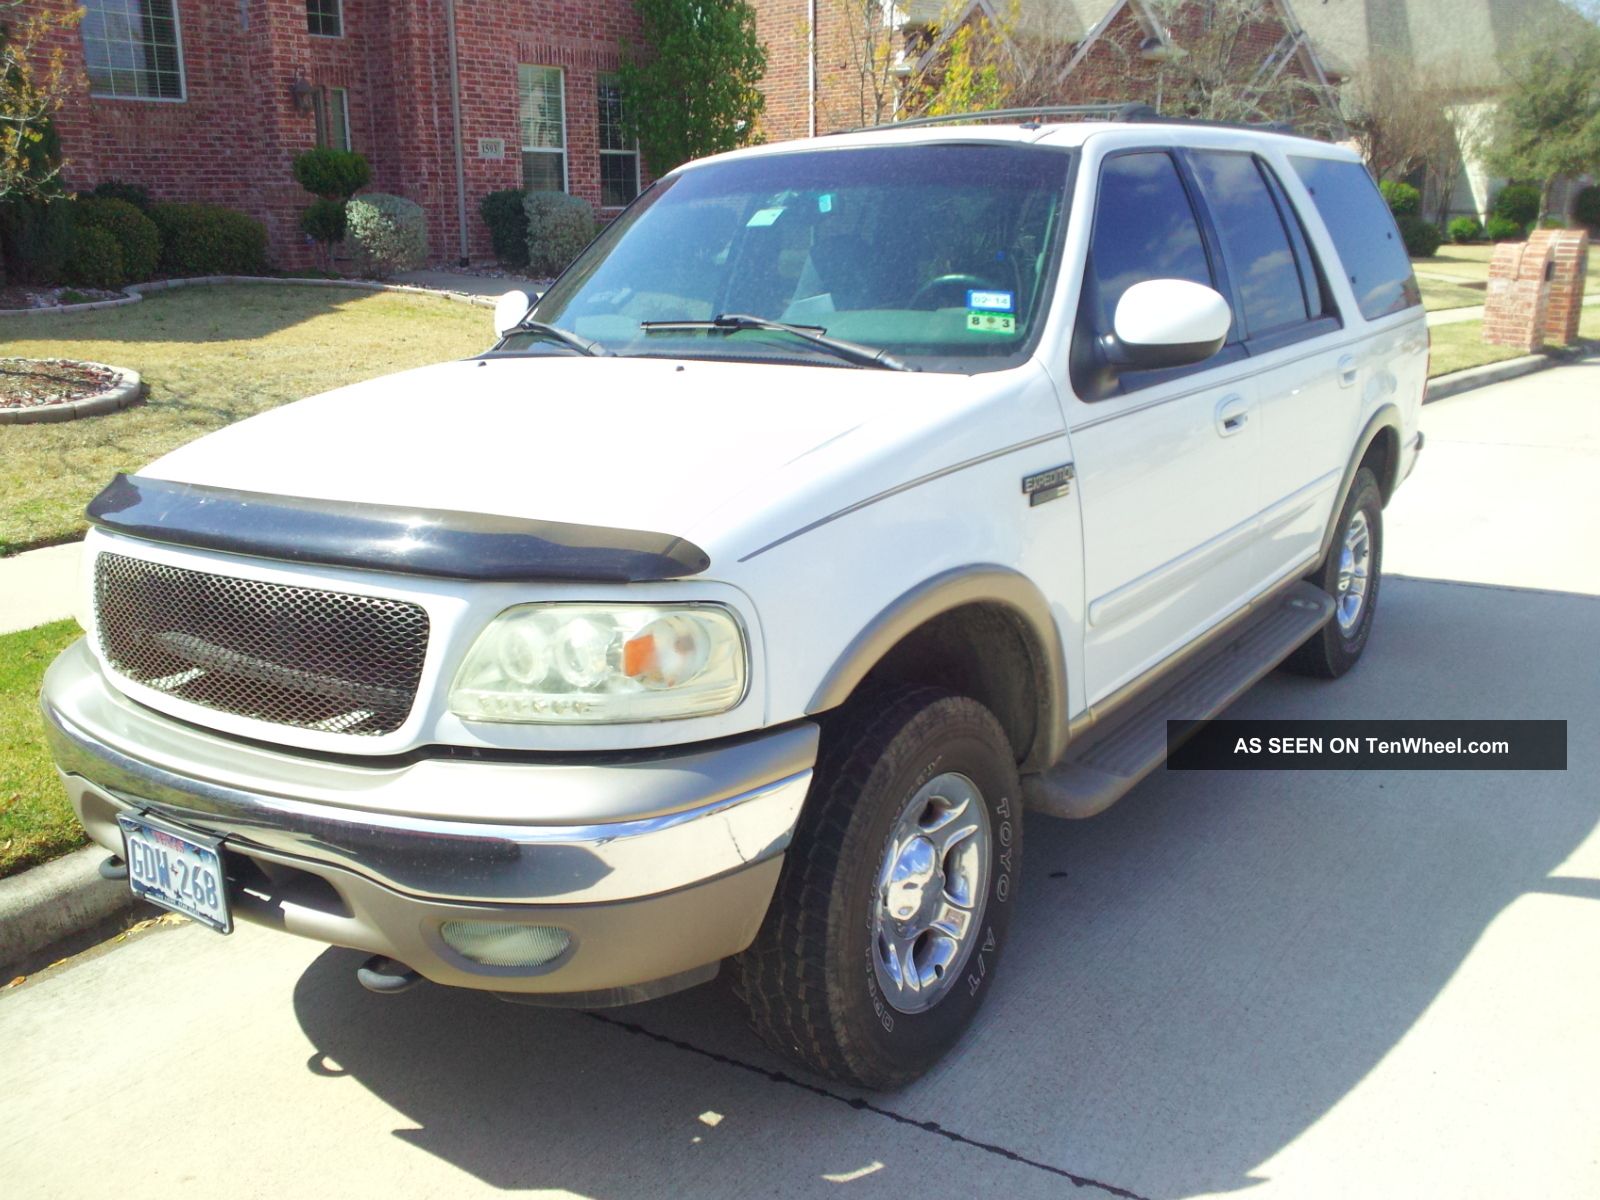 2000 Eddie bauer ford expedition review #9